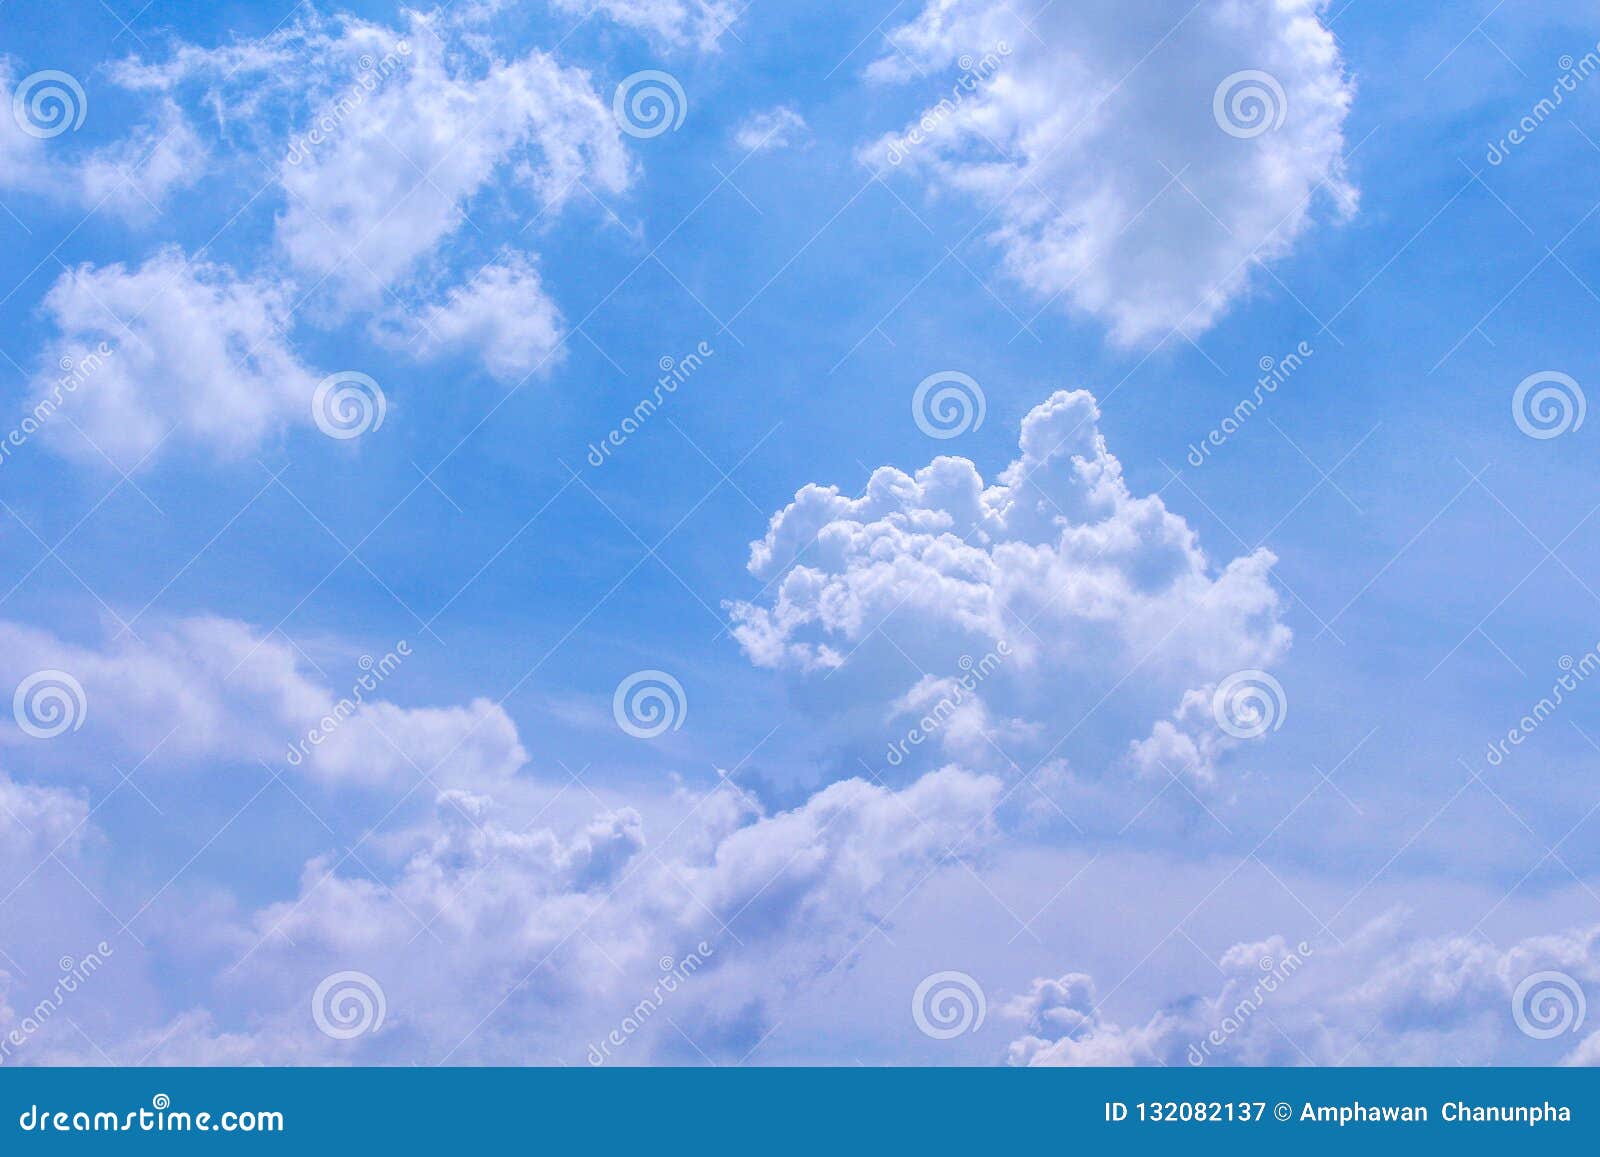 Cloud Groups Patterns on Bright Bluesky Background in Summer Day Stock ...